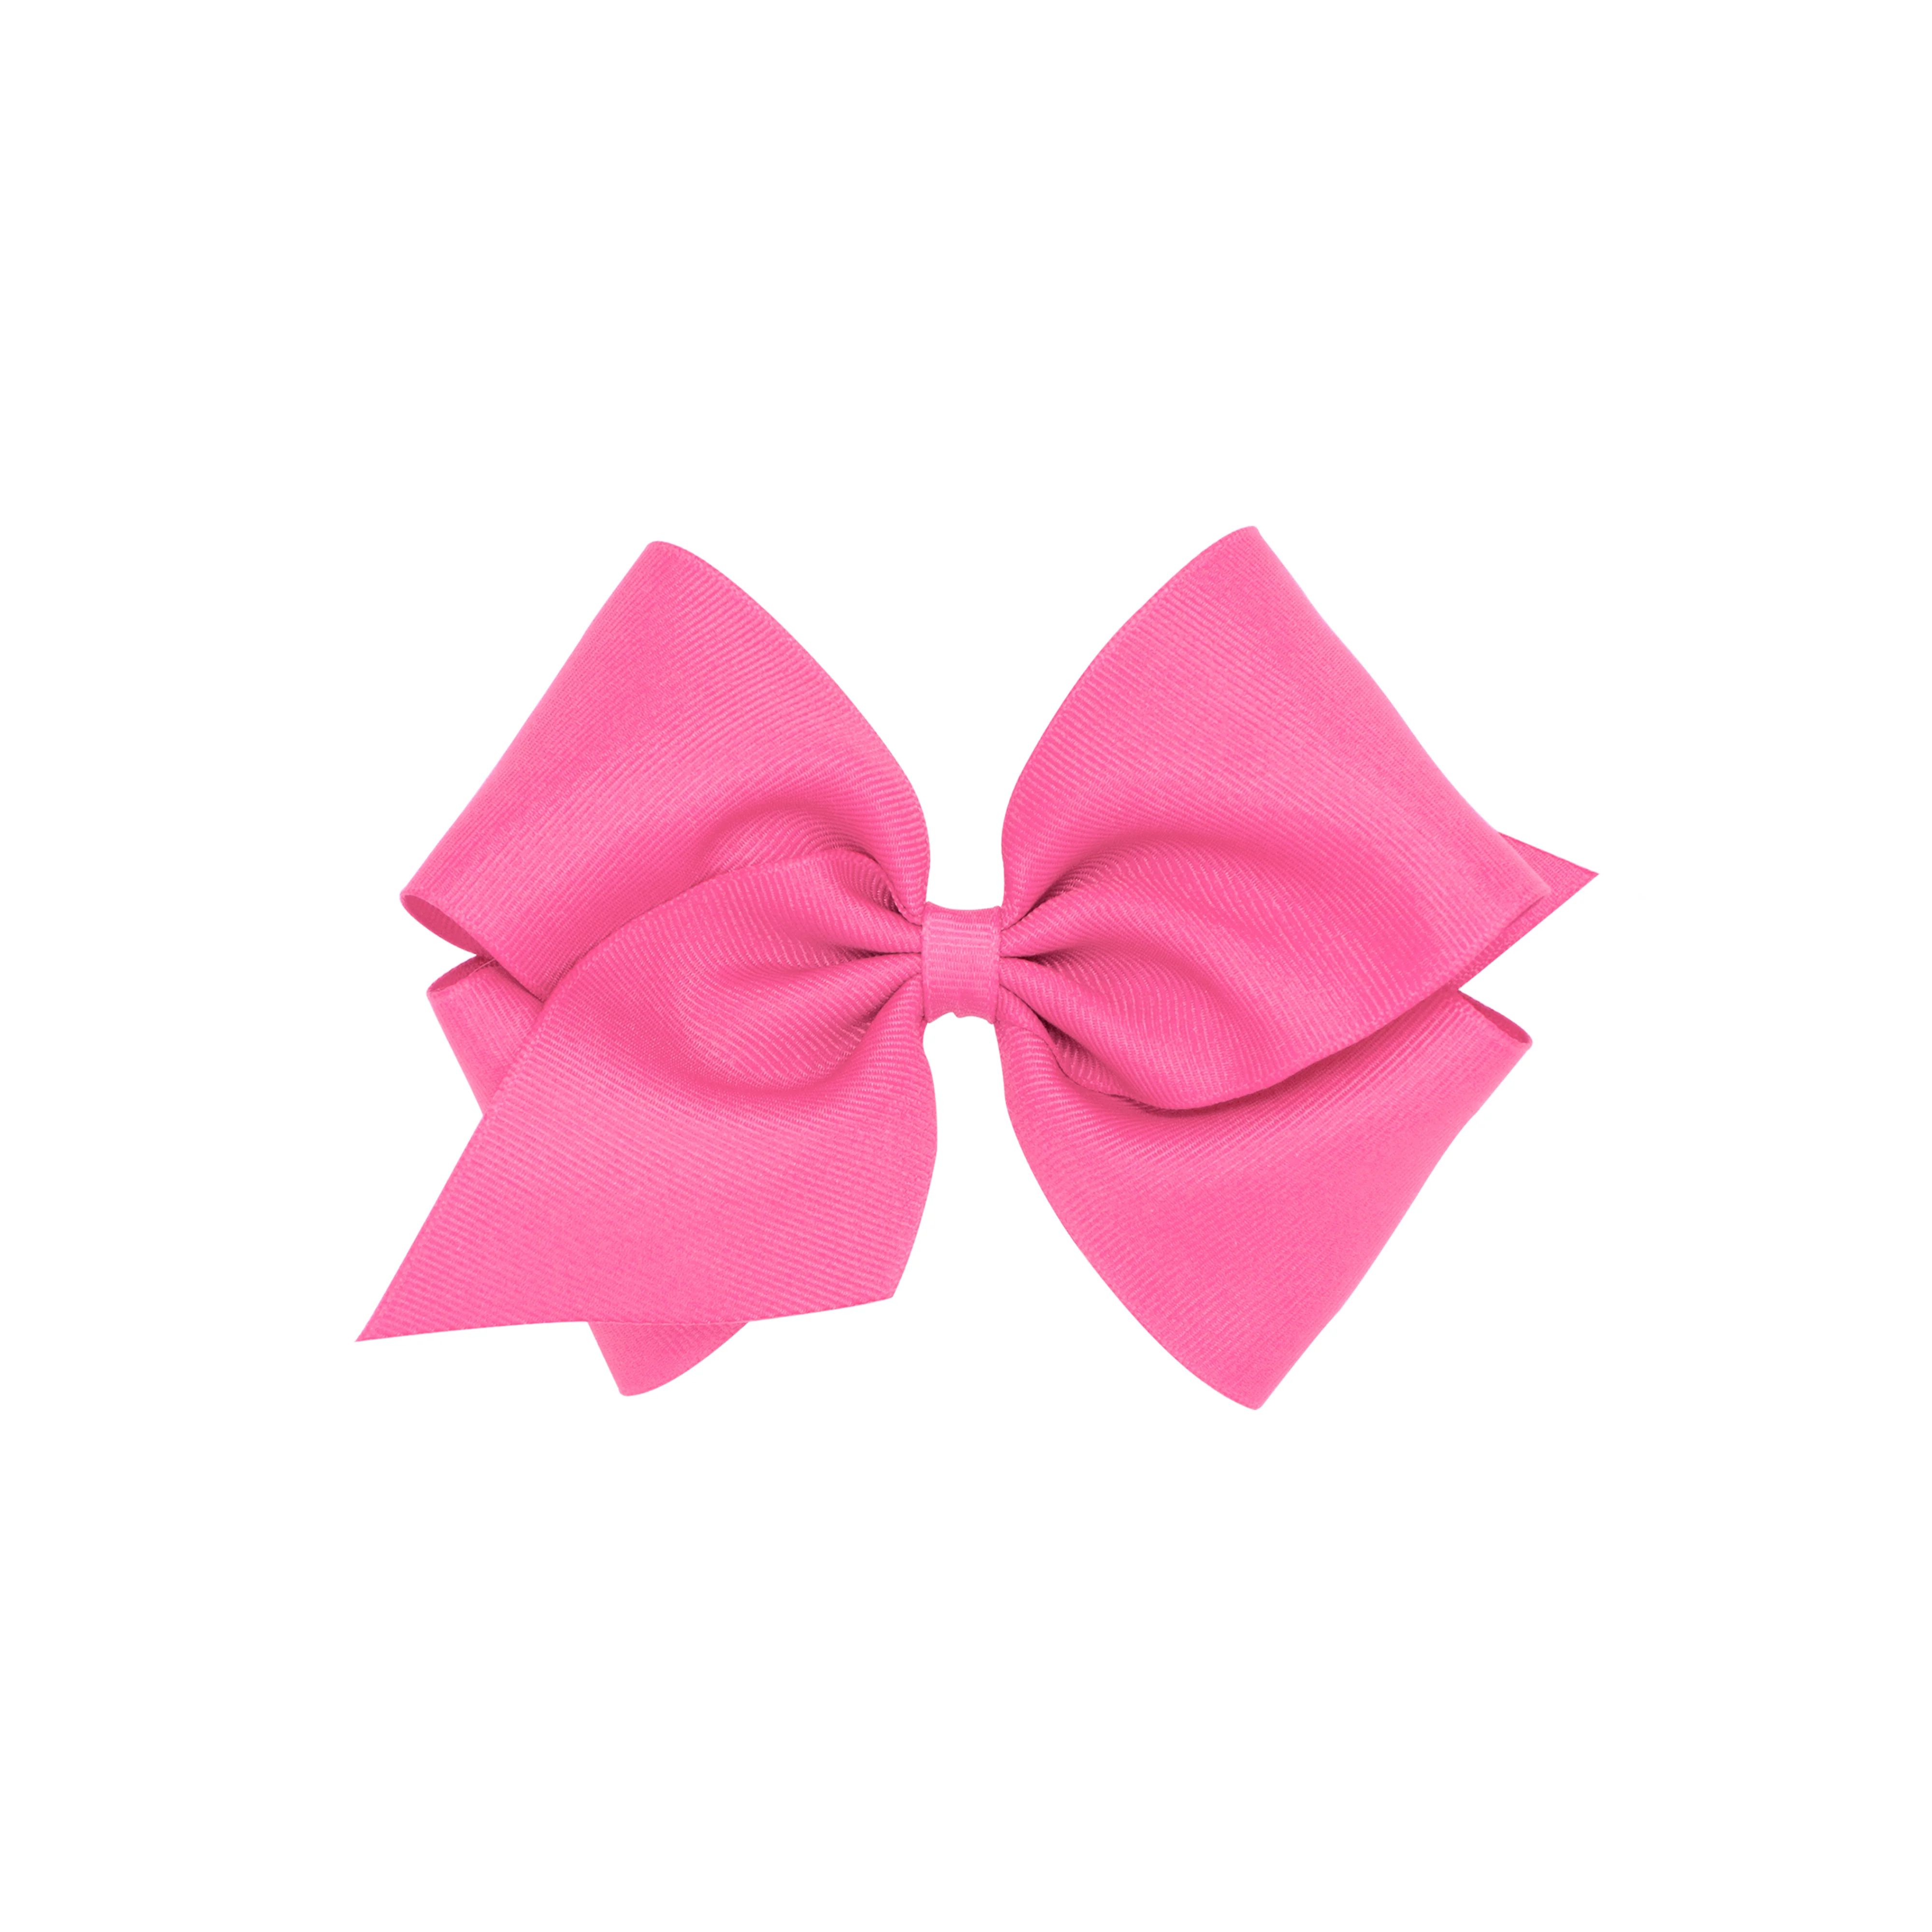 Wee Ones Hair Bow - Hamptons Hot Pink | The Beaufort Bonnet Company